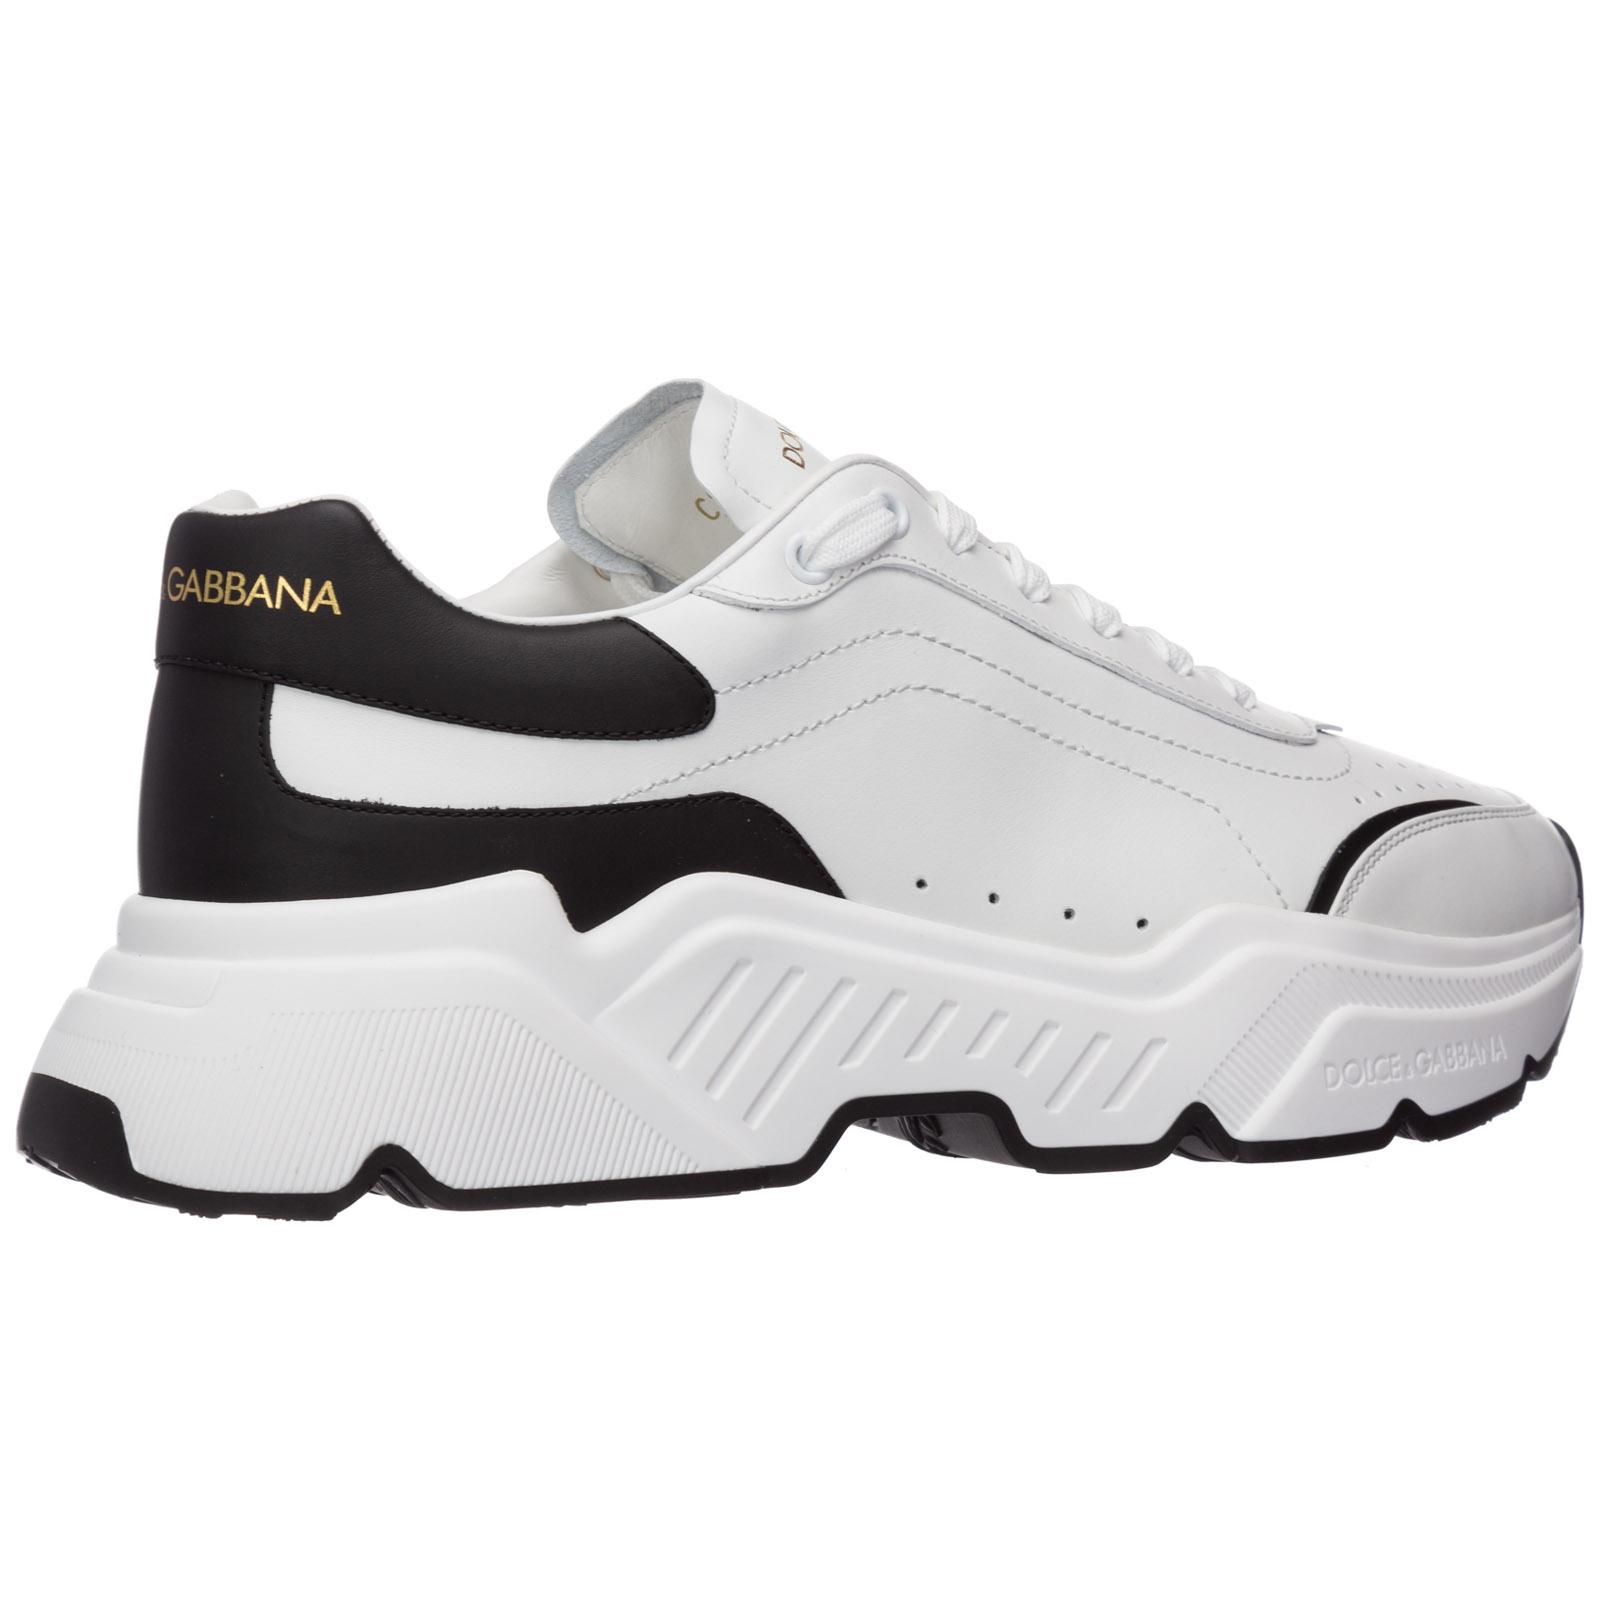 Dolce & Gabbana Leather Daymaster Sneakers In Nappa Calfskin in White for  Men - Save 52% - Lyst